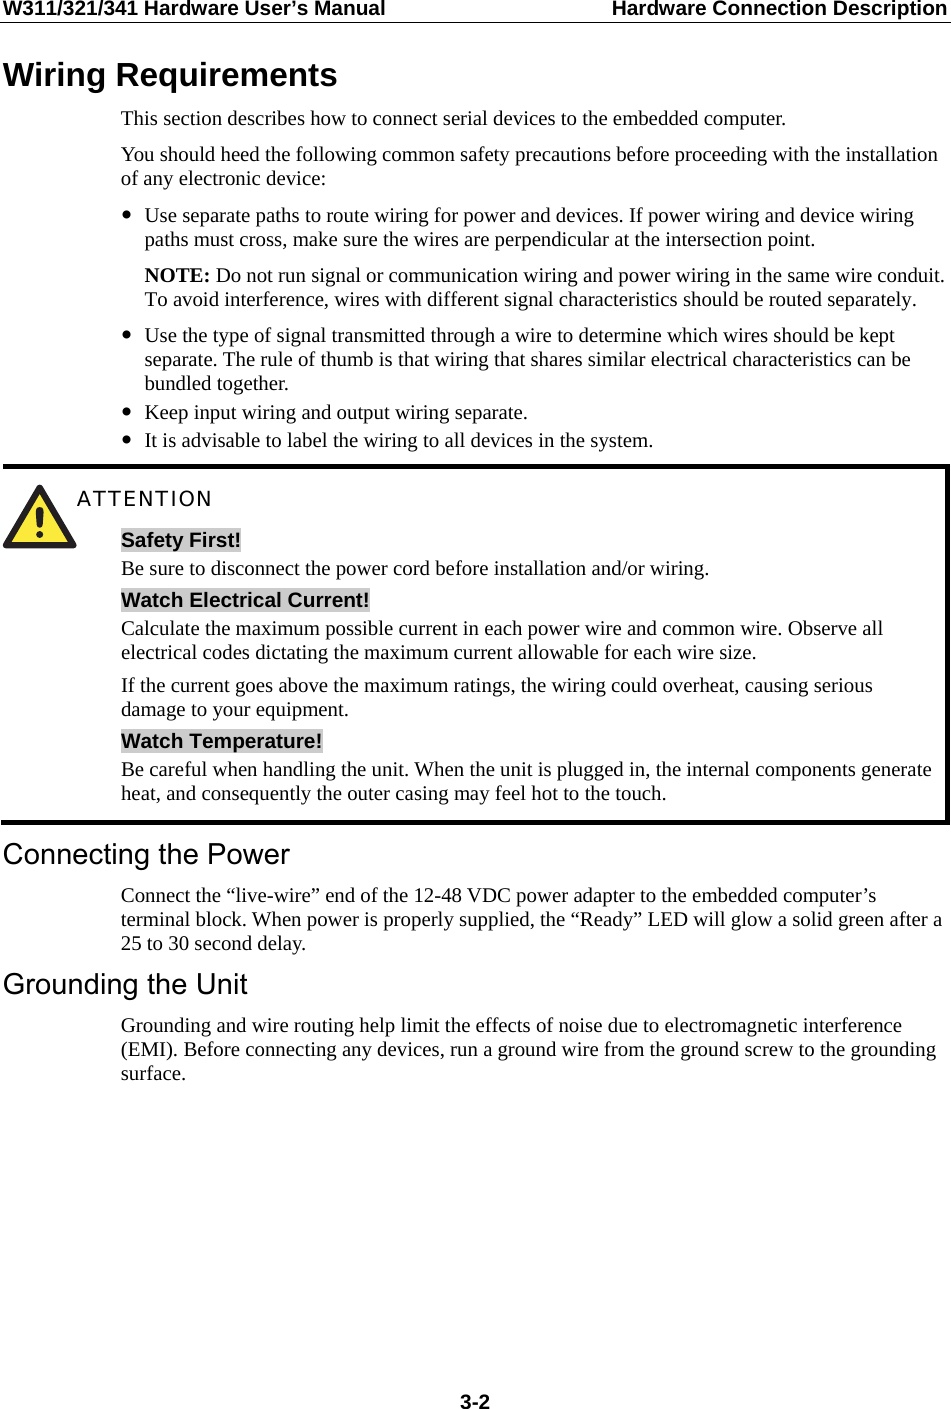 W311/321/341 Hardware User’s Manual  Hardware Connection Description Wiring Requirements This section describes how to connect serial devices to the embedded computer. You should heed the following common safety precautions before proceeding with the installation of any electronic device: y Use separate paths to route wiring for power and devices. If power wiring and device wiring paths must cross, make sure the wires are perpendicular at the intersection point. NOTE: Do not run signal or communication wiring and power wiring in the same wire conduit. To avoid interference, wires with different signal characteristics should be routed separately. y Use the type of signal transmitted through a wire to determine which wires should be kept separate. The rule of thumb is that wiring that shares similar electrical characteristics can be bundled together. y Keep input wiring and output wiring separate. y It is advisable to label the wiring to all devices in the system.  ATTENTION Safety First! Be sure to disconnect the power cord before installation and/or wiring. Watch Electrical Current! Calculate the maximum possible current in each power wire and common wire. Observe all electrical codes dictating the maximum current allowable for each wire size. If the current goes above the maximum ratings, the wiring could overheat, causing serious damage to your equipment. Watch Temperature! Be careful when handling the unit. When the unit is plugged in, the internal components generate heat, and consequently the outer casing may feel hot to the touch. Connecting the Power Connect the “live-wire” end of the 12-48 VDC power adapter to the embedded computer’s terminal block. When power is properly supplied, the “Ready” LED will glow a solid green after a 25 to 30 second delay. Grounding the Unit Grounding and wire routing help limit the effects of noise due to electromagnetic interference (EMI). Before connecting any devices, run a ground wire from the ground screw to the grounding surface.         3-2